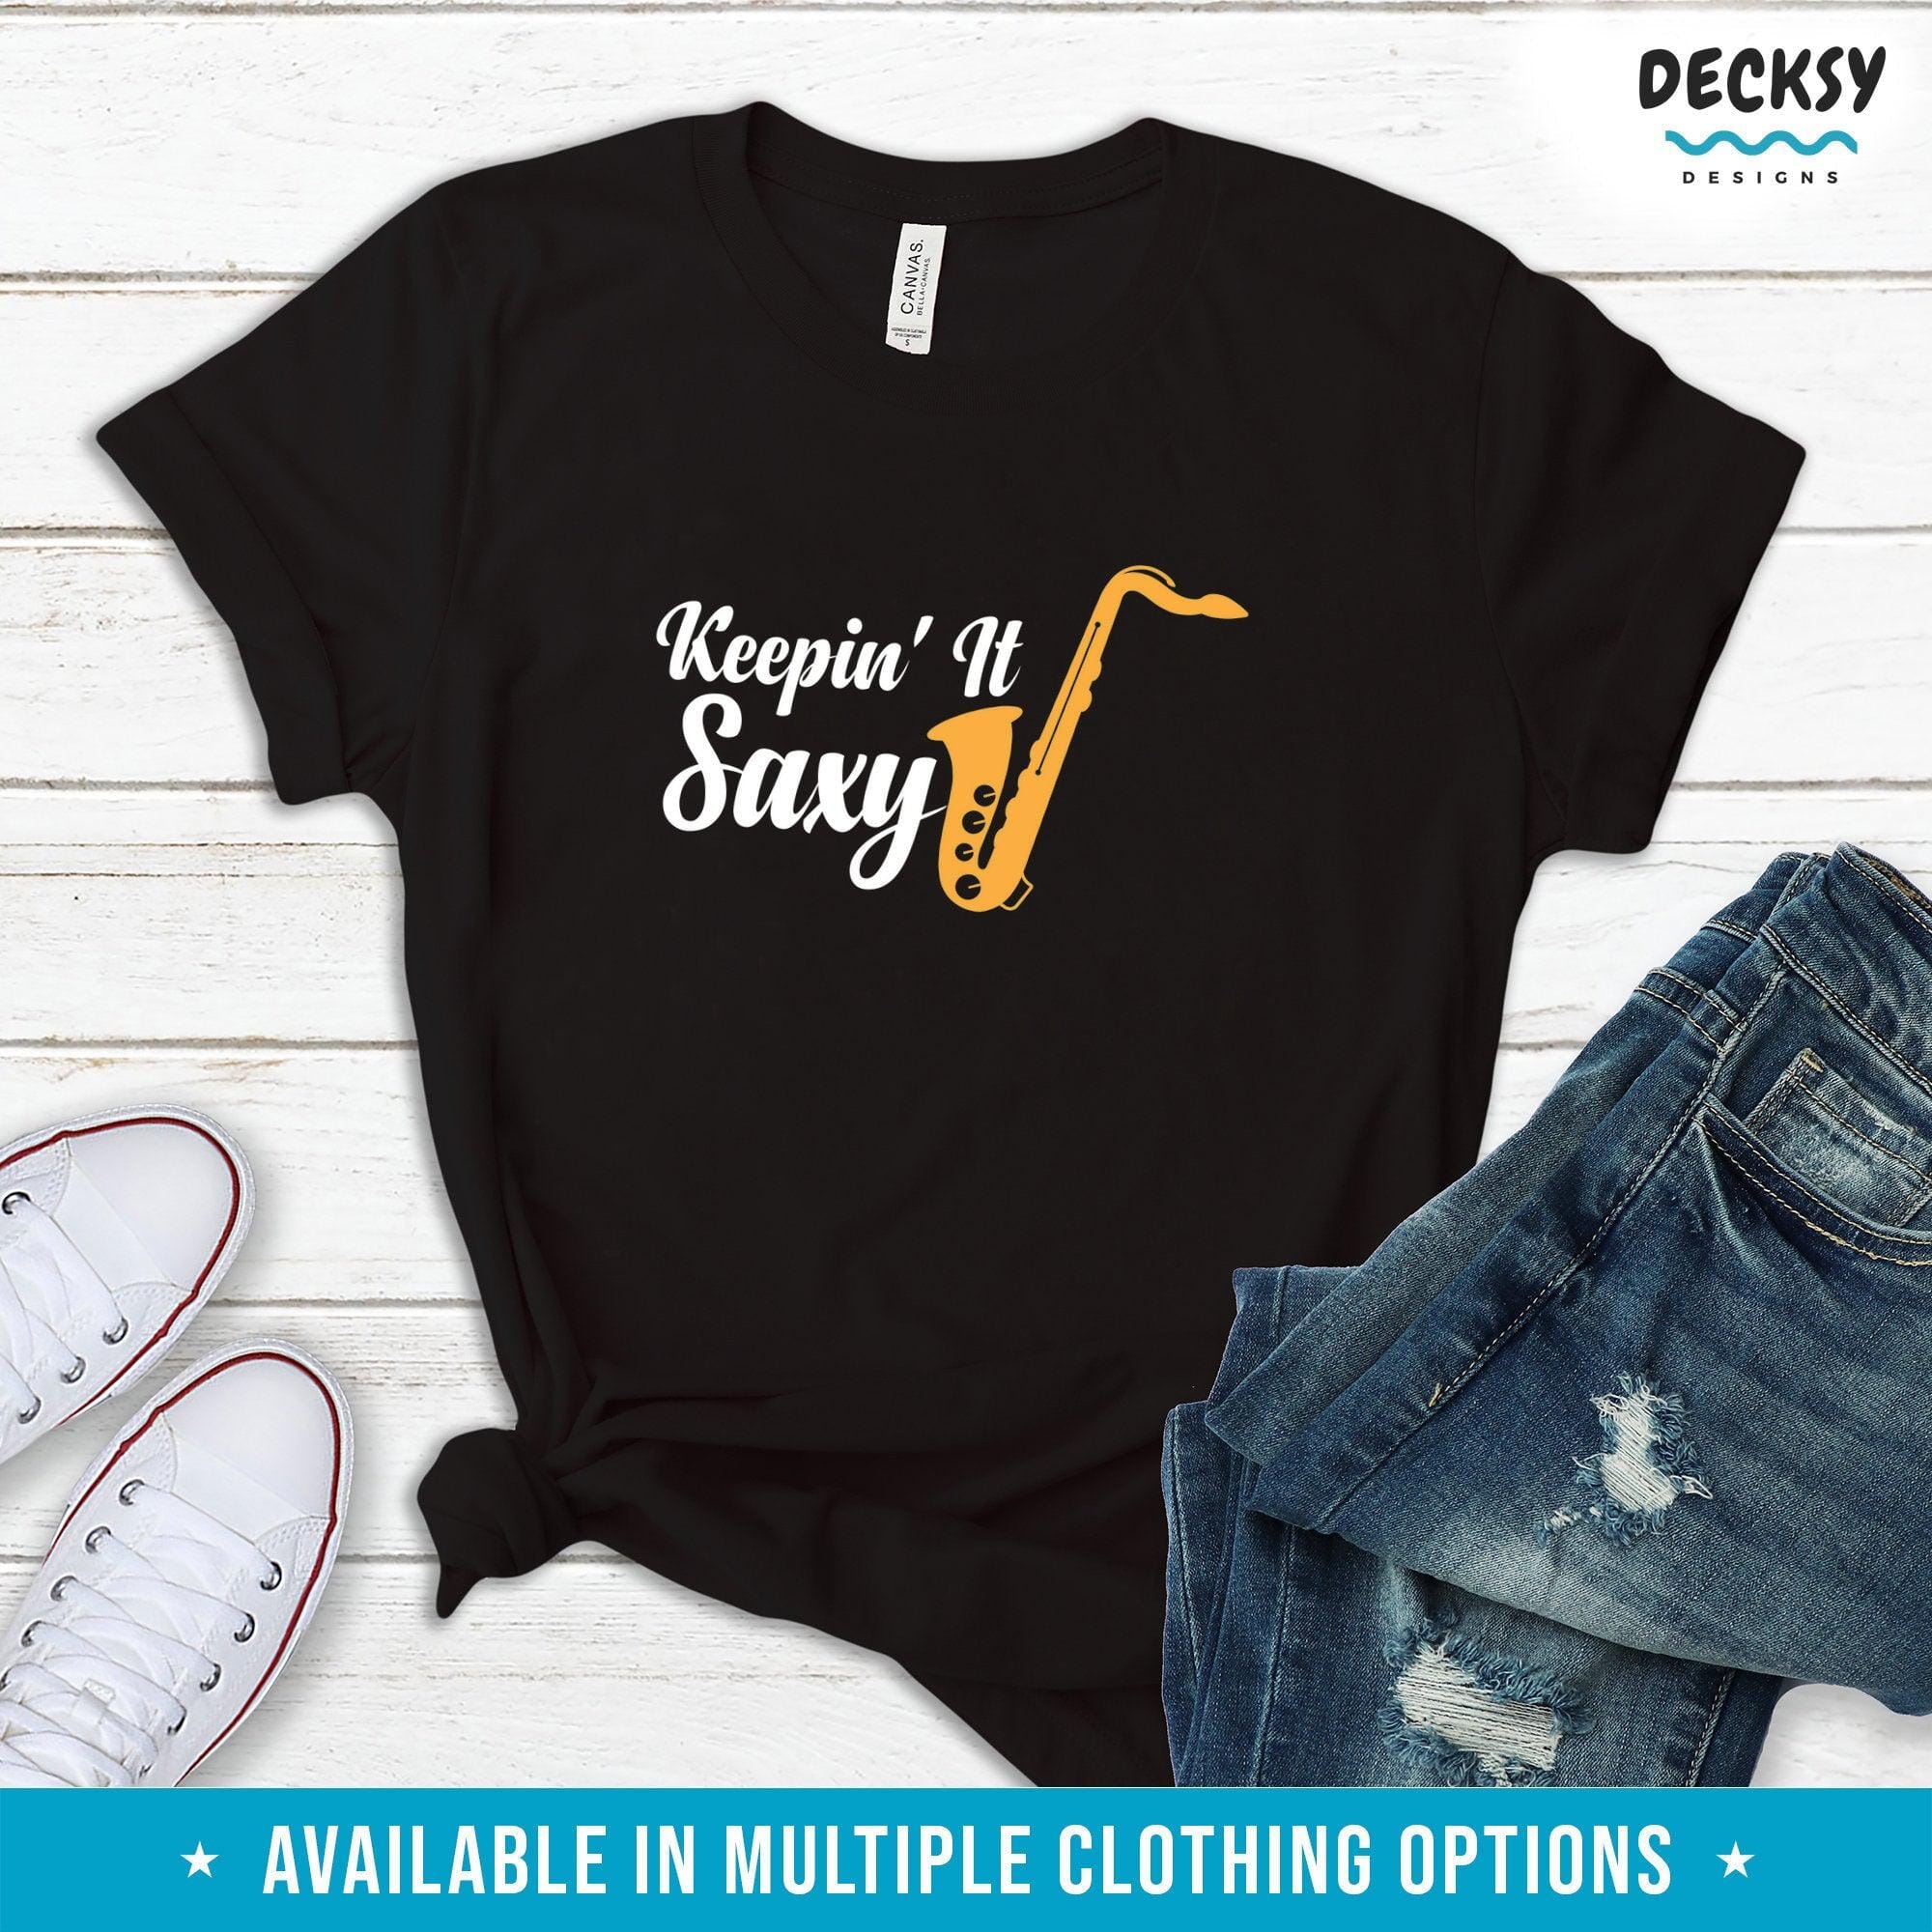 Saxophone Shirt, Saxophone Player Gift-Clothing:Gender-Neutral Adult Clothing:Tops & Tees:T-shirts:Graphic Tees-DecksyDesigns